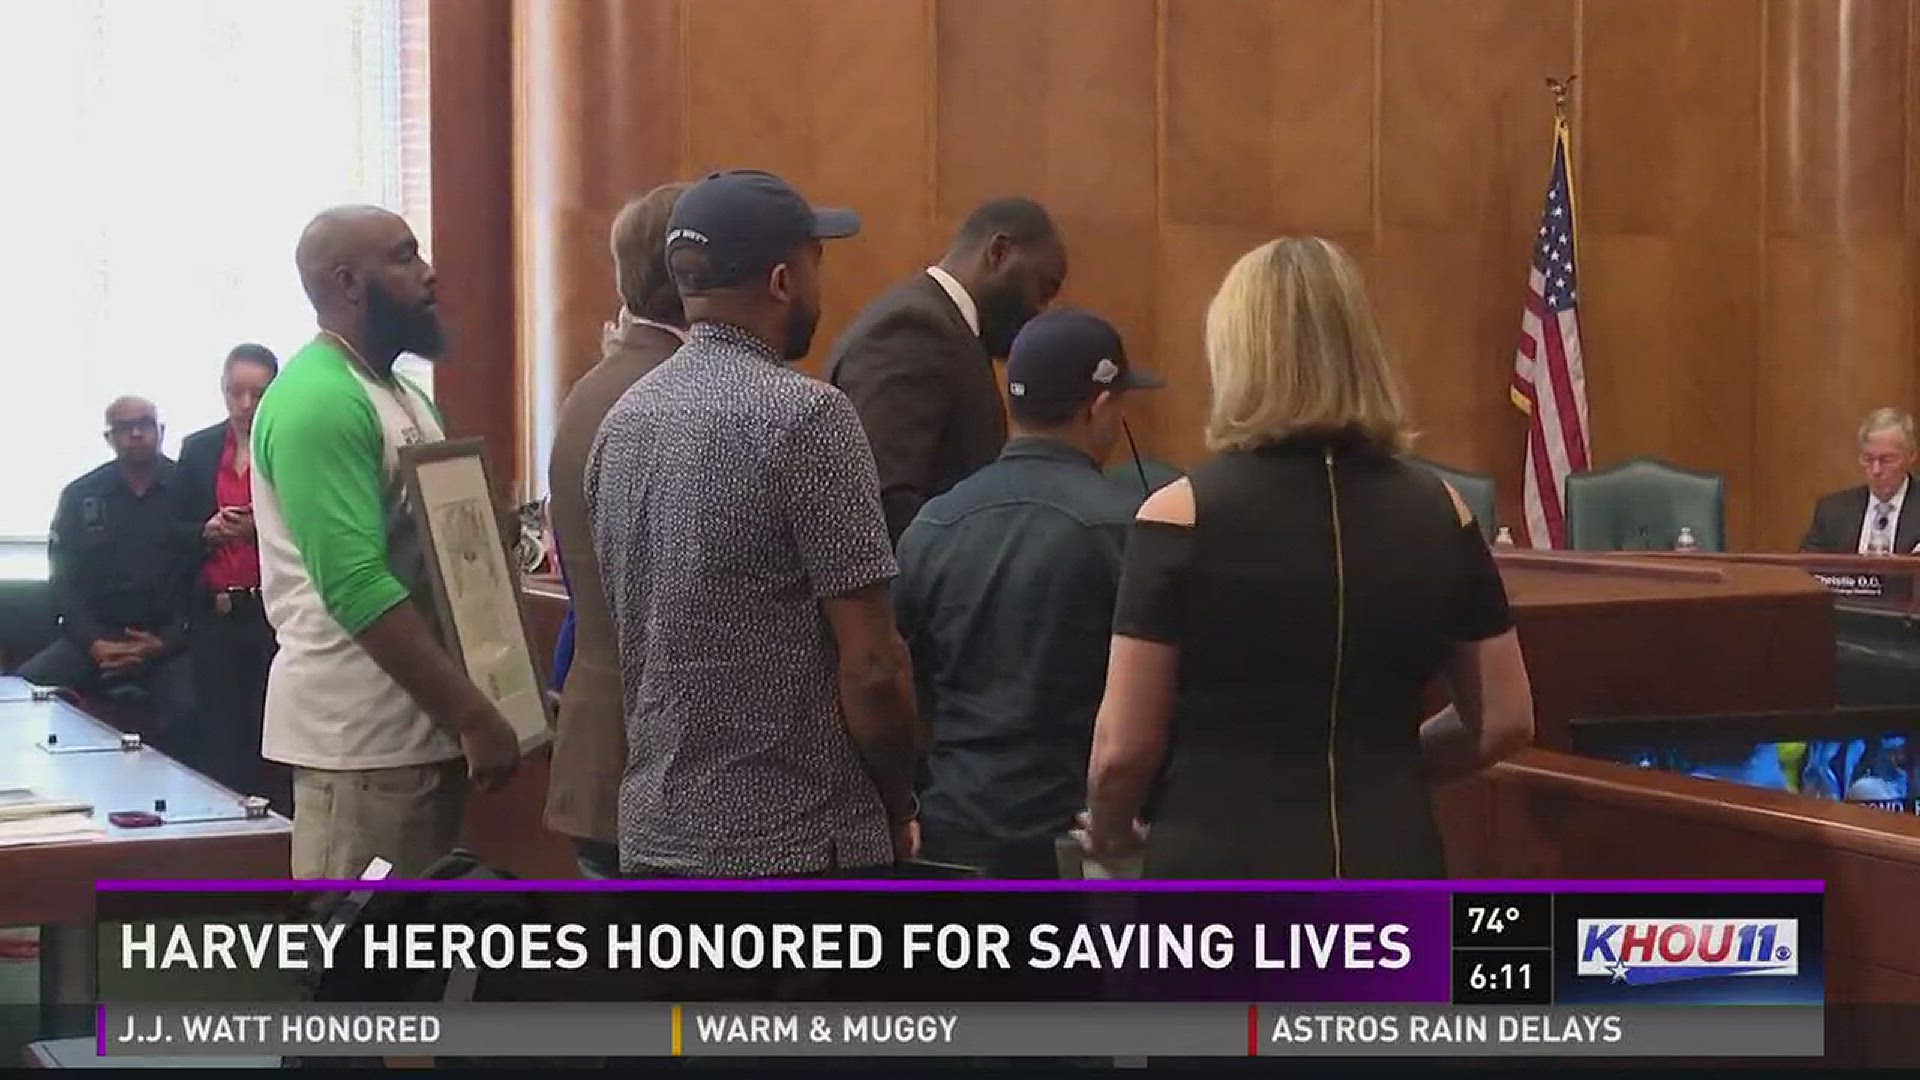 Six months after Harvey, we're hearing new stories of heroic acts that saved hundreds of lives during the hurricane. On Tuesday, a few of those heroes were honored by City Council.